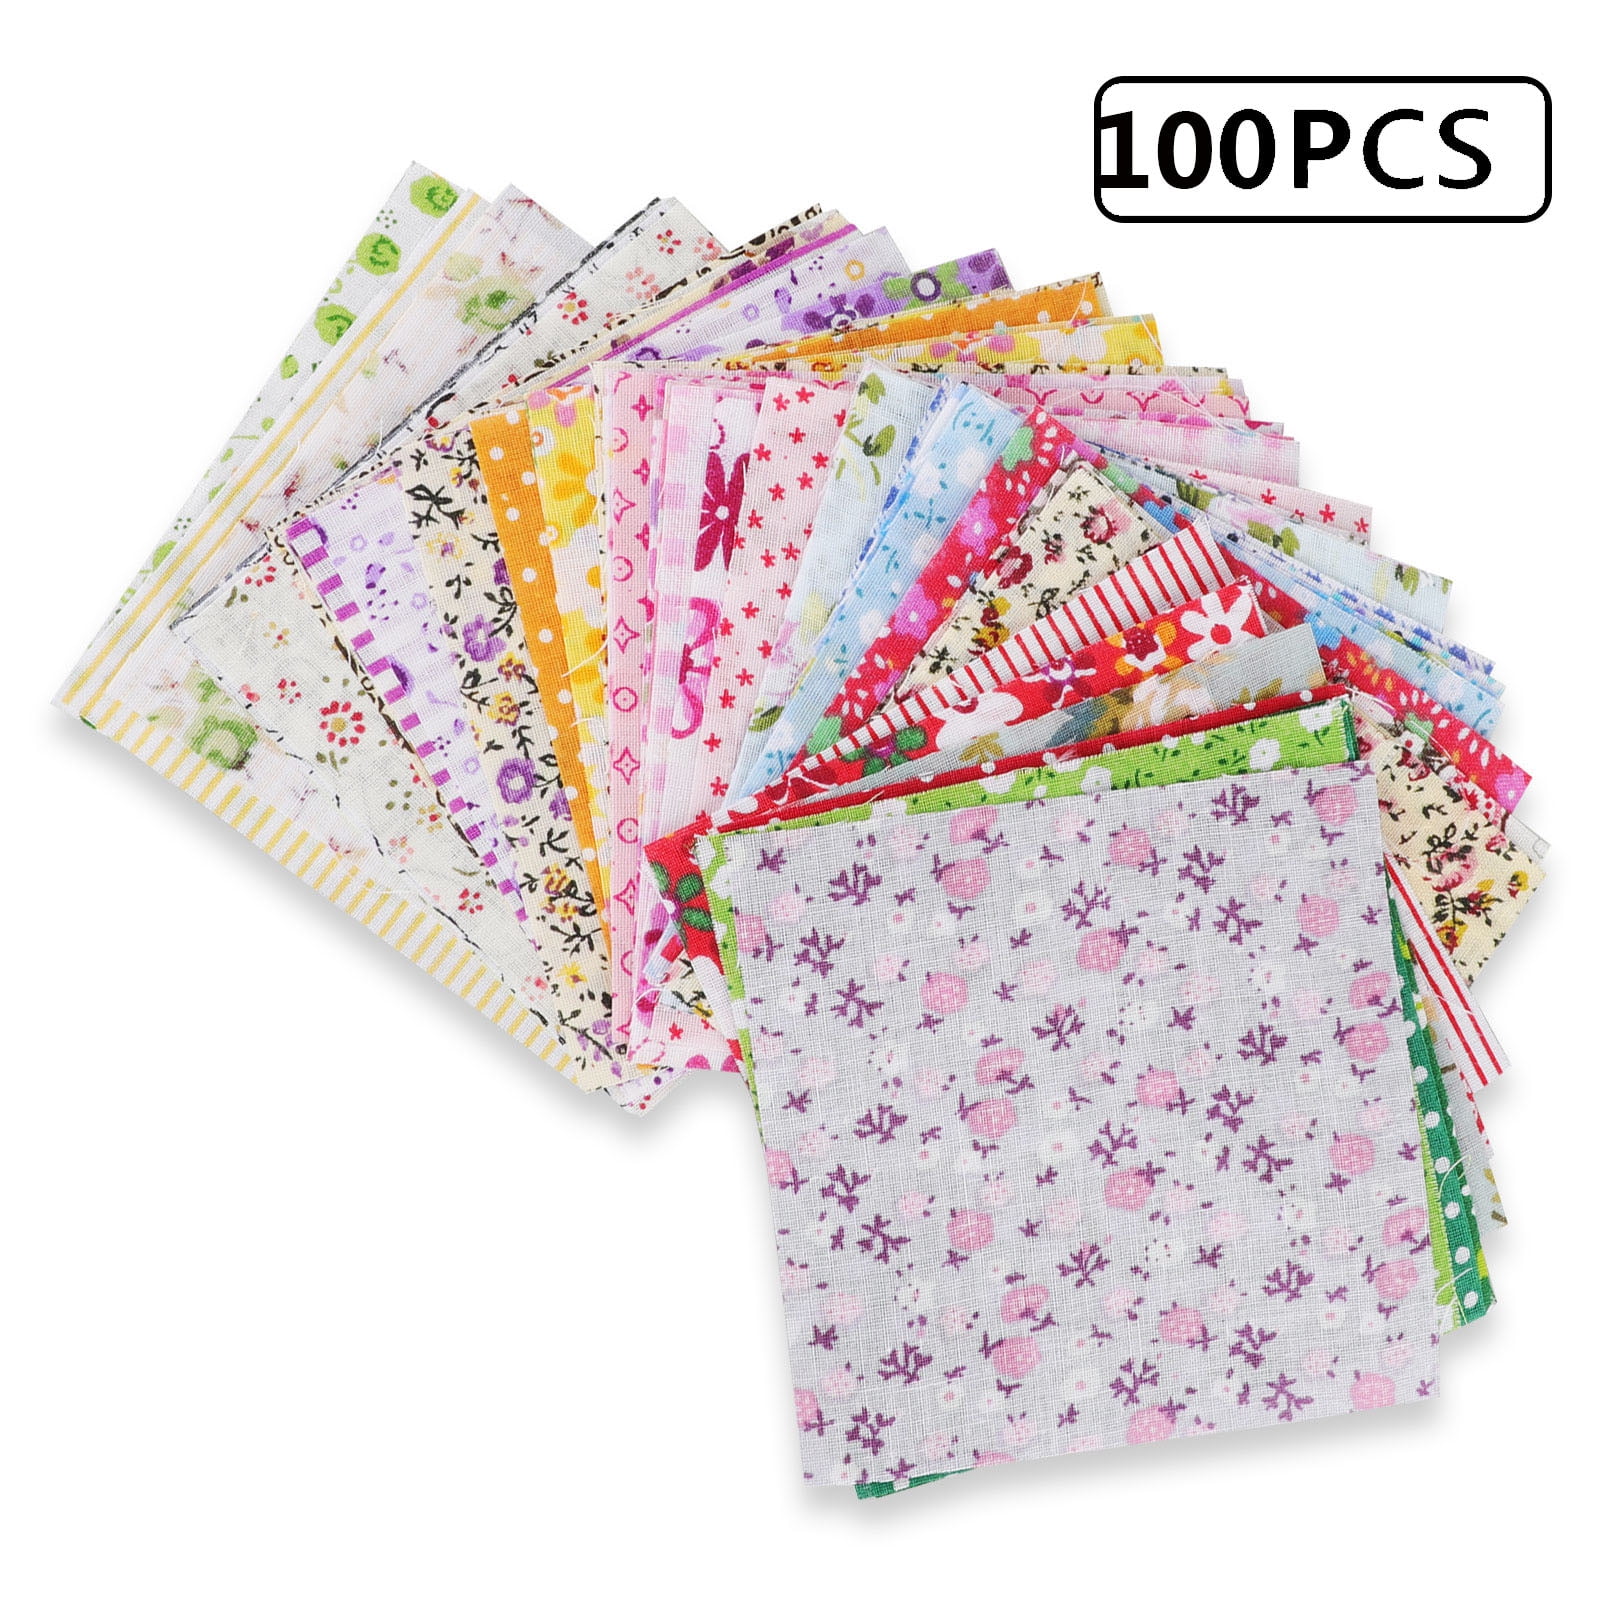 Pack Of 30 Cotton Fabric Bundles Patchwork Fabrics Cotton Cloth DIY  Handmade Sewing Quilting Fabric Cotton Fabric Various Designs 9.84 Inch X  9.84 Inc